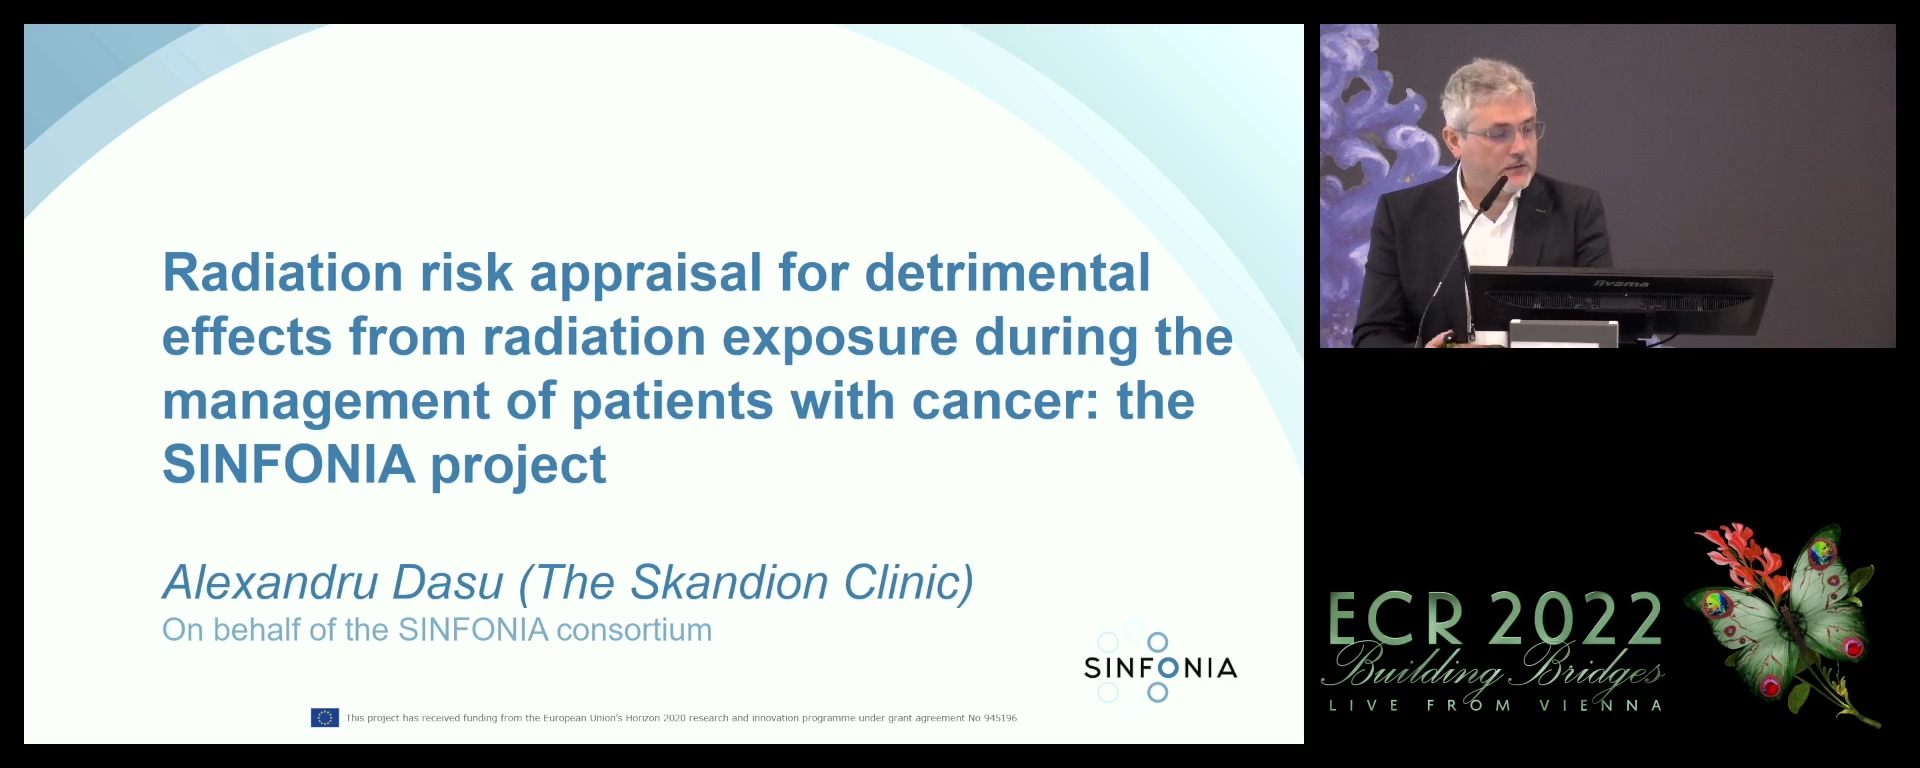 Radiation risk appraisal for detrimental effects from radiation exposure during the management of patients with cancer: the SINFONIA project - Alexandru Dasu, Uppsala / SE